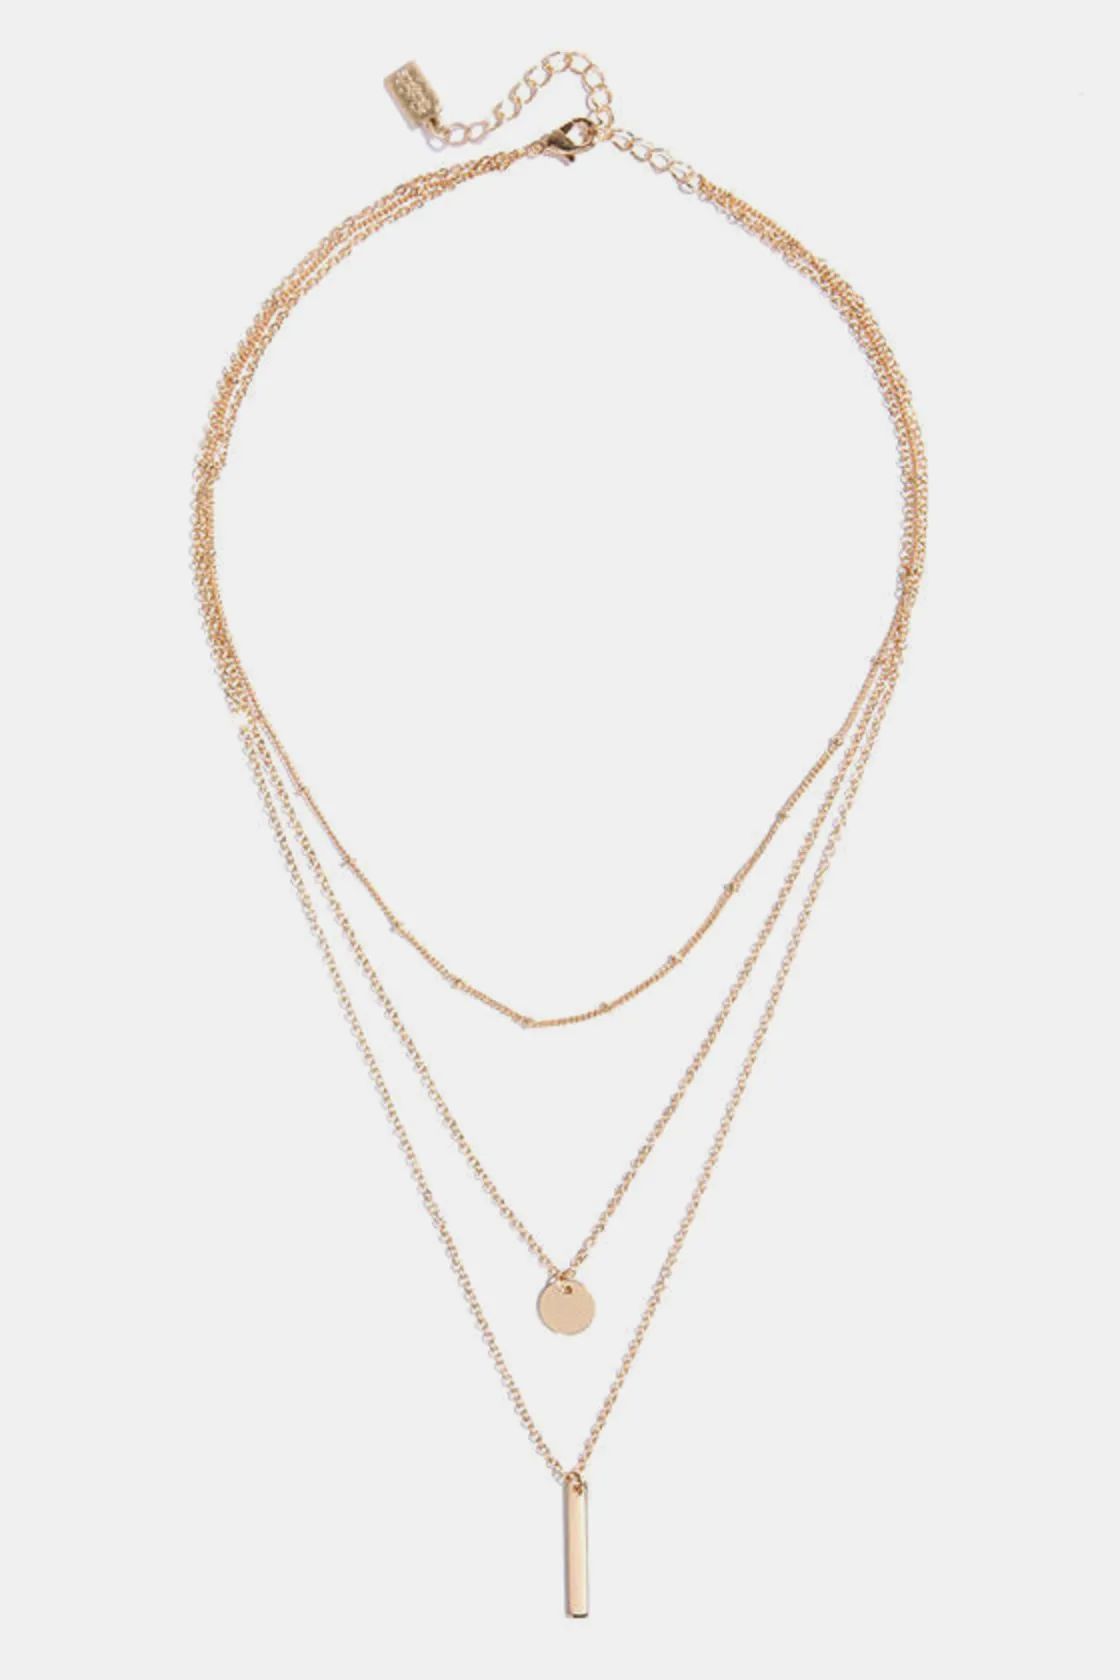 Perfect Trio Gold Layered Necklace | Lulus